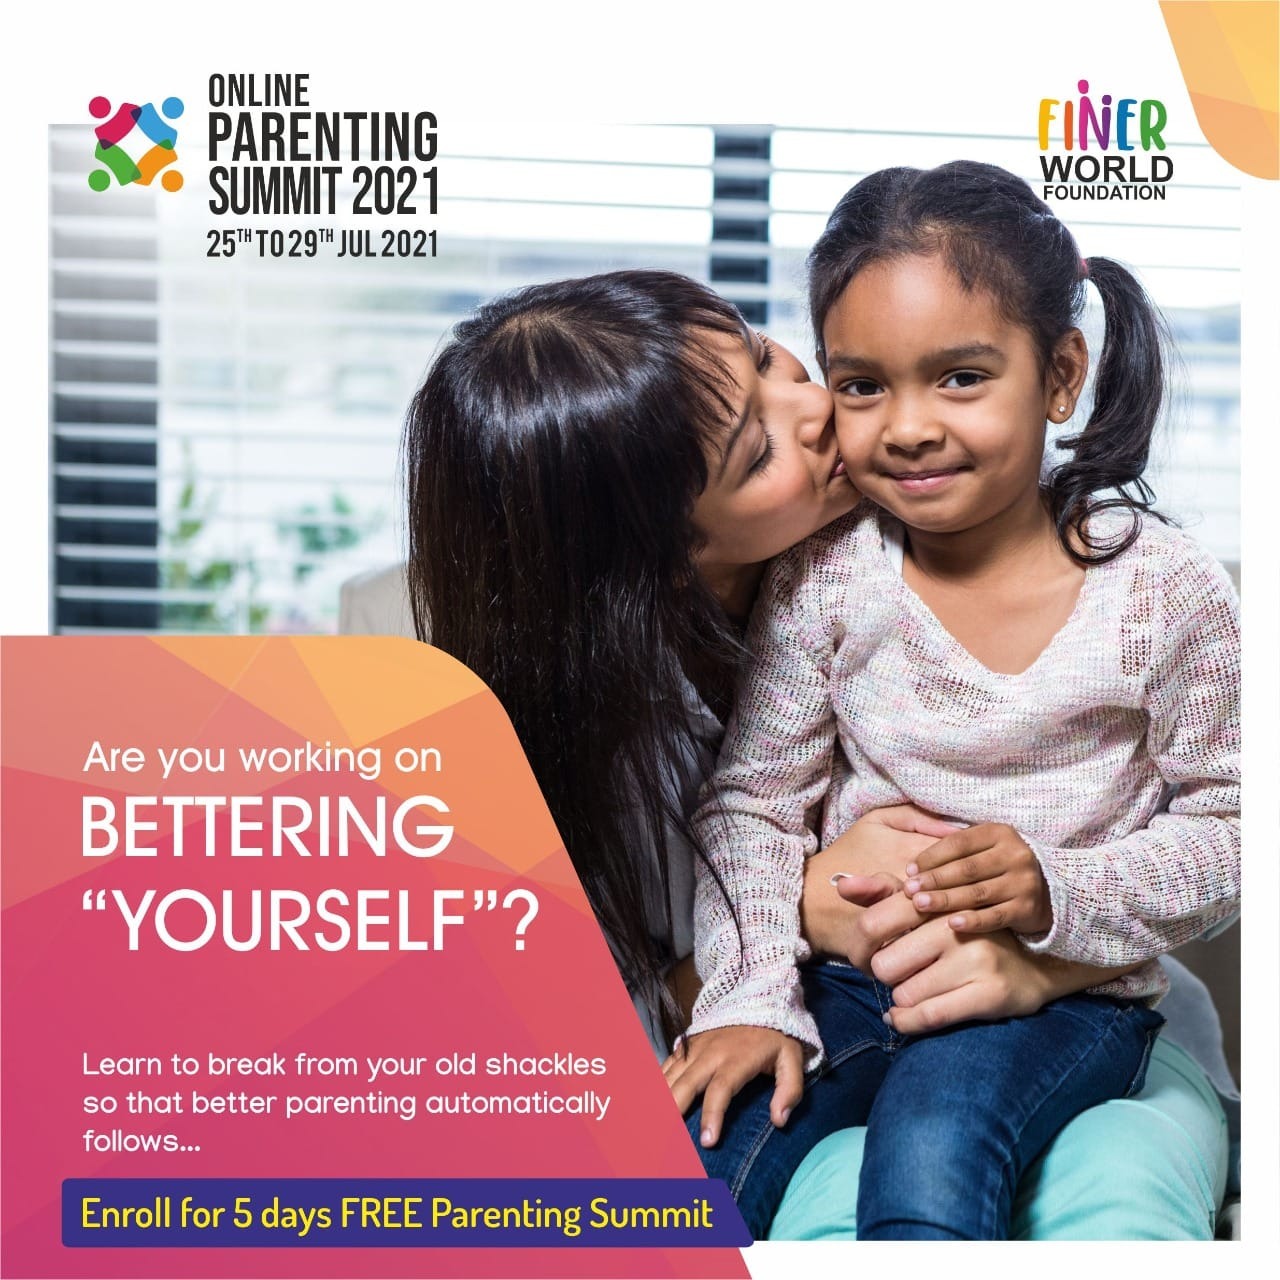 Online Parenting Summit 2021Education and LearningPlay Schools - CrecheAll Indiaother